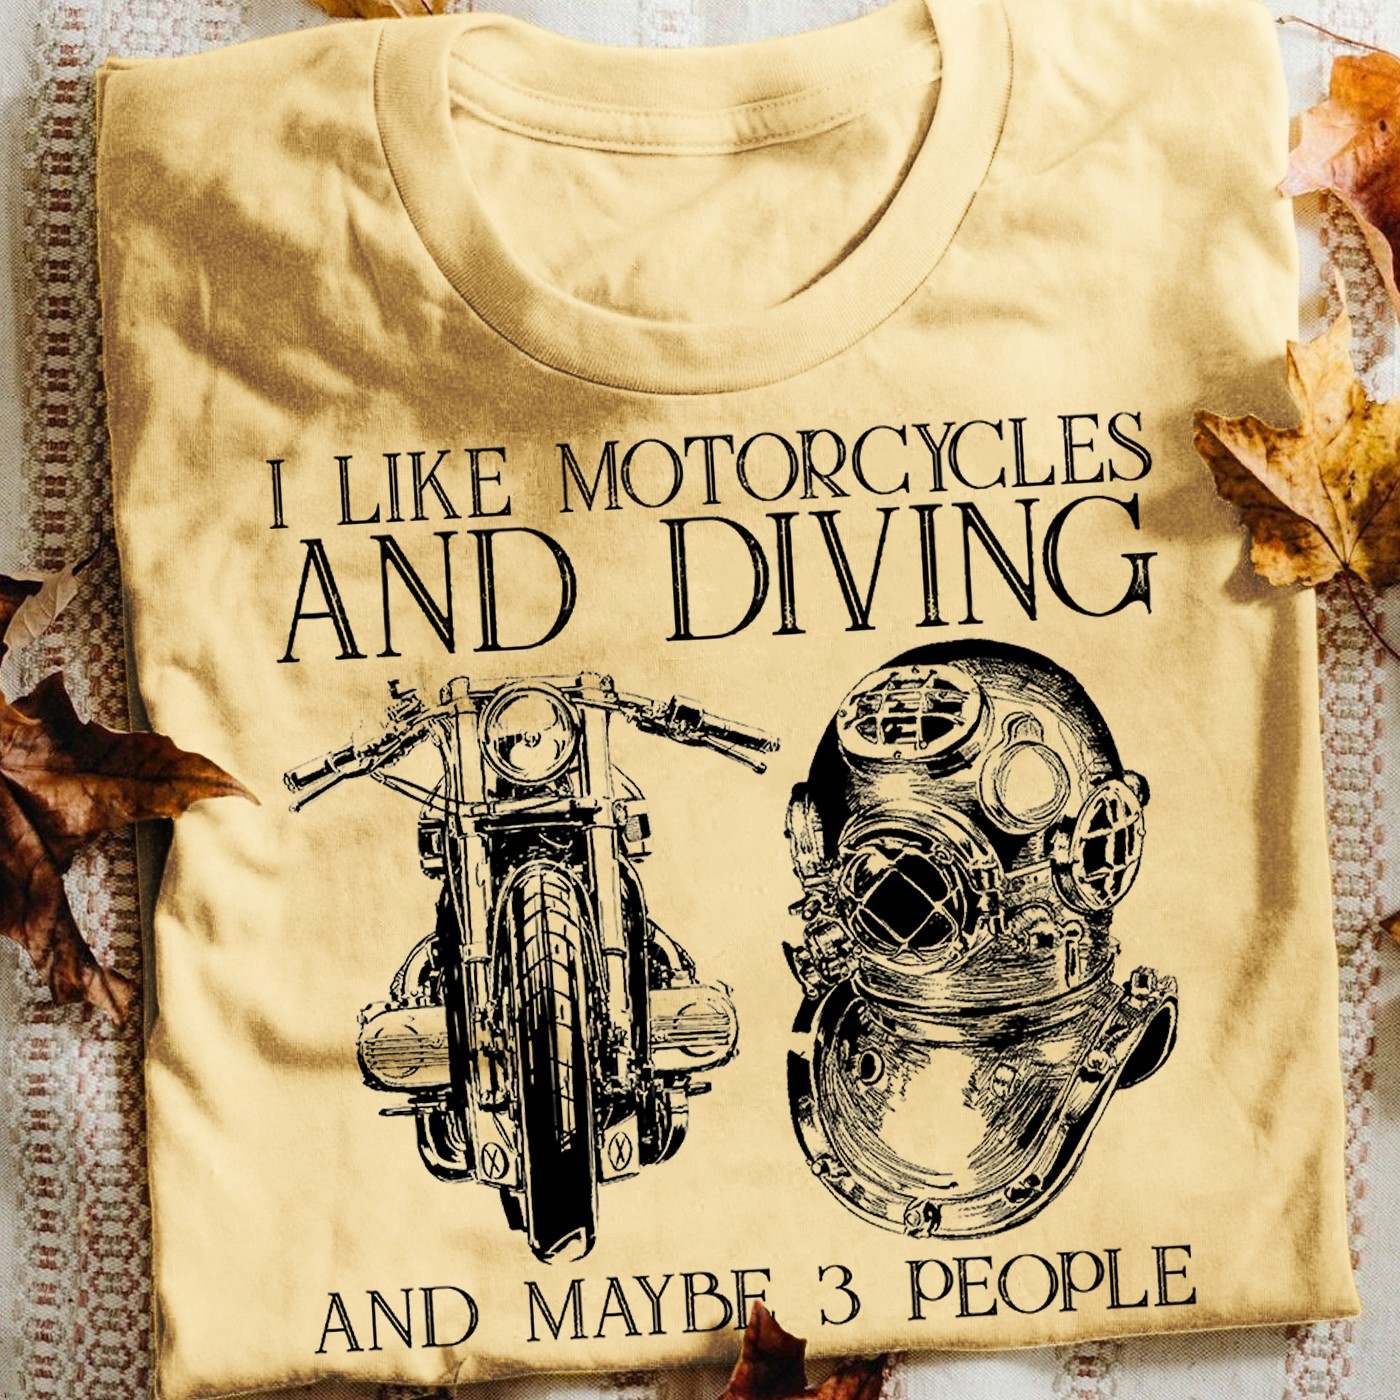 I like motorcycles and diving and maybe 3 people - Love diving